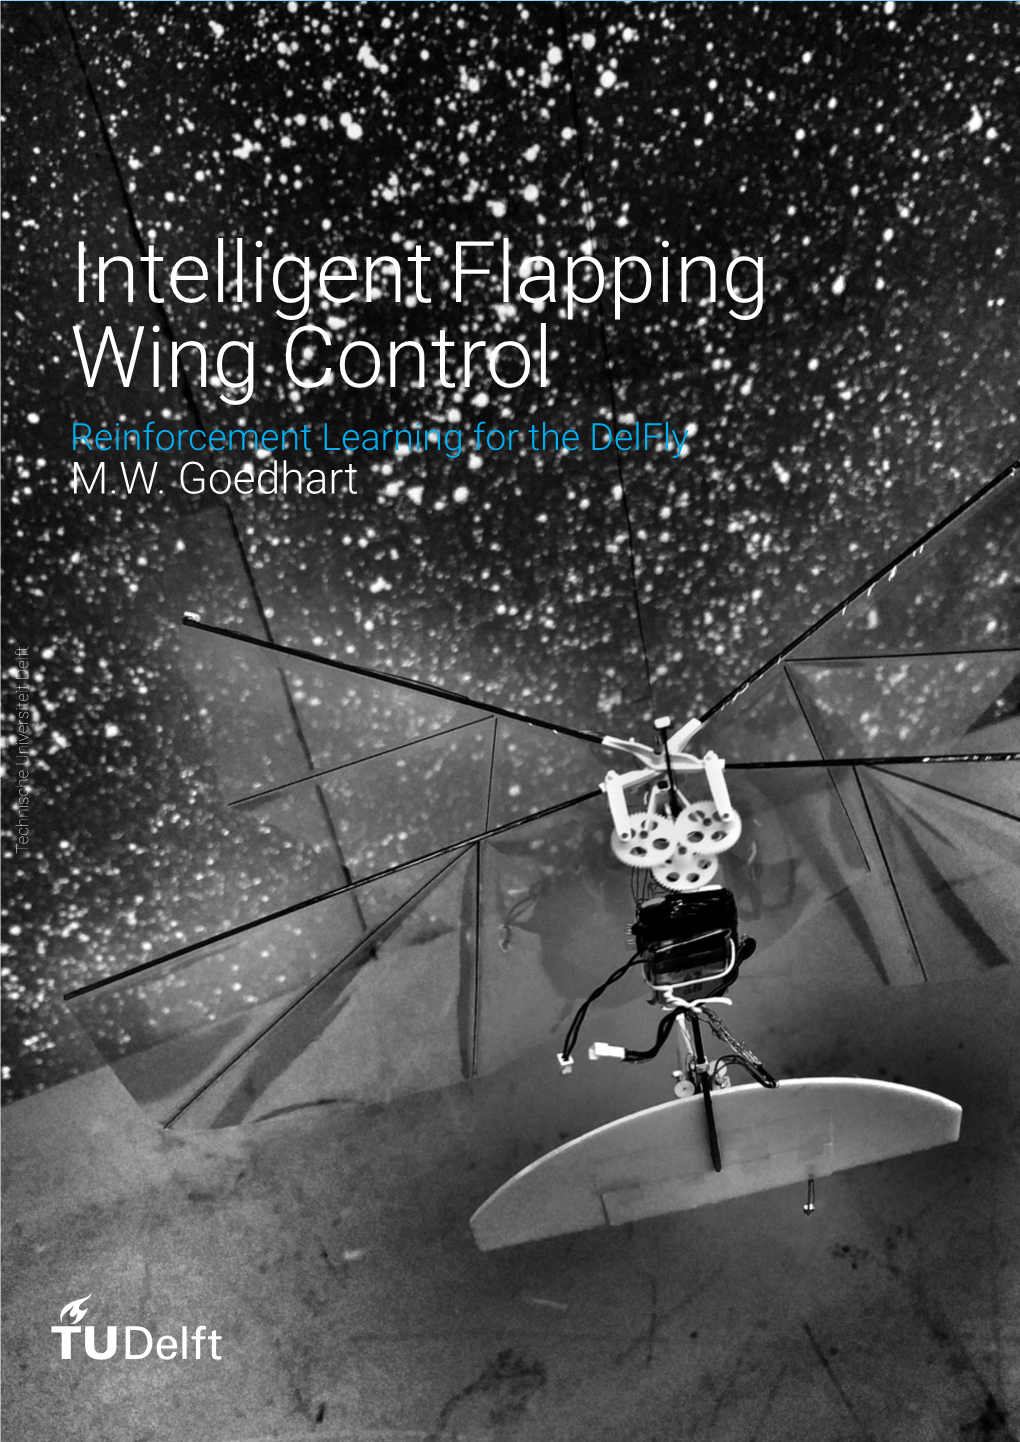 Intelligent Flapping Wing Control Reinforcement Learning for the Delfly M.W